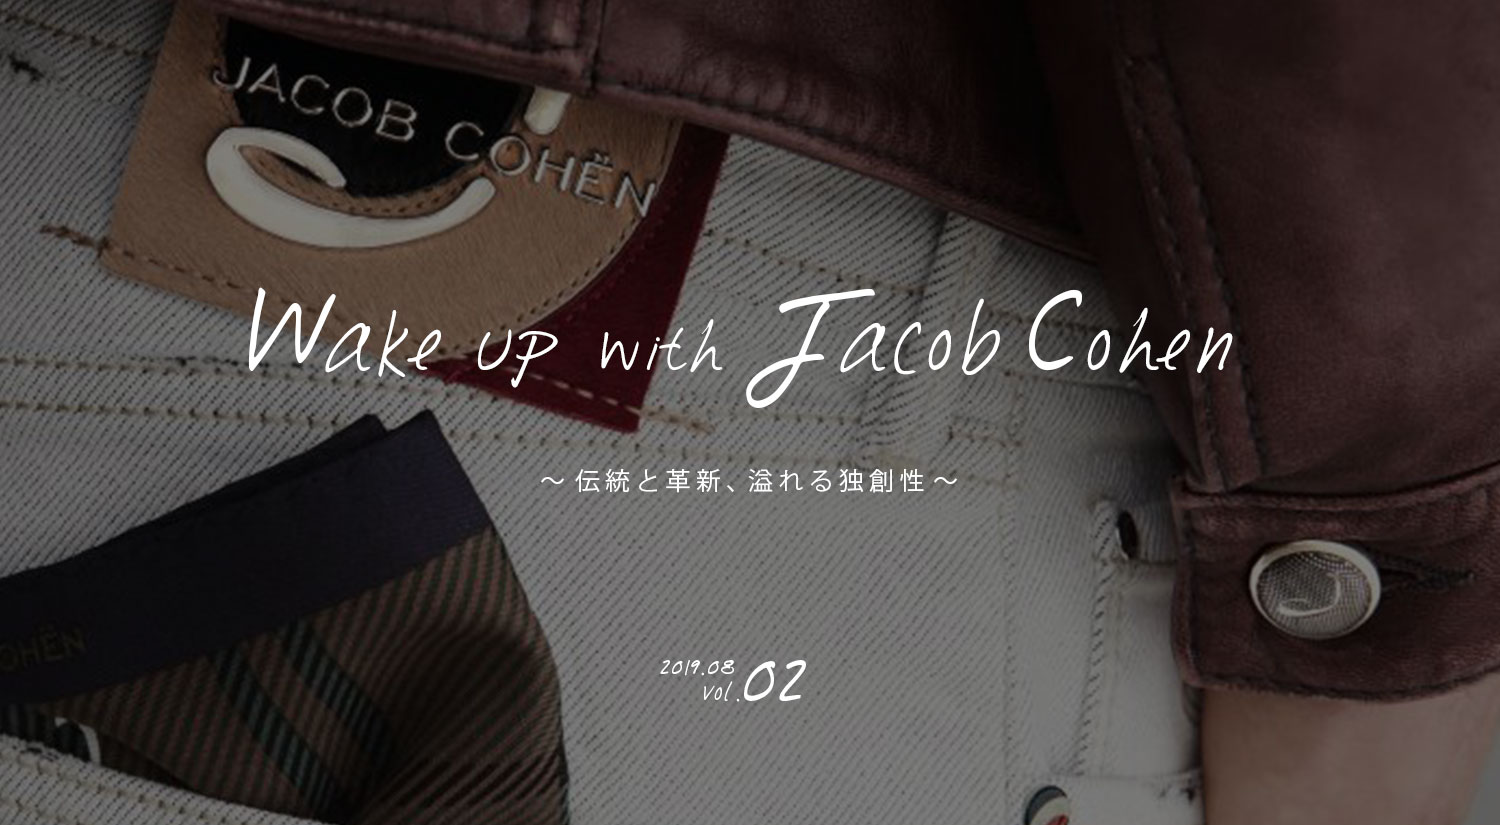 『Wake up with Jacob cohen』Vol.２、来週公開です！！